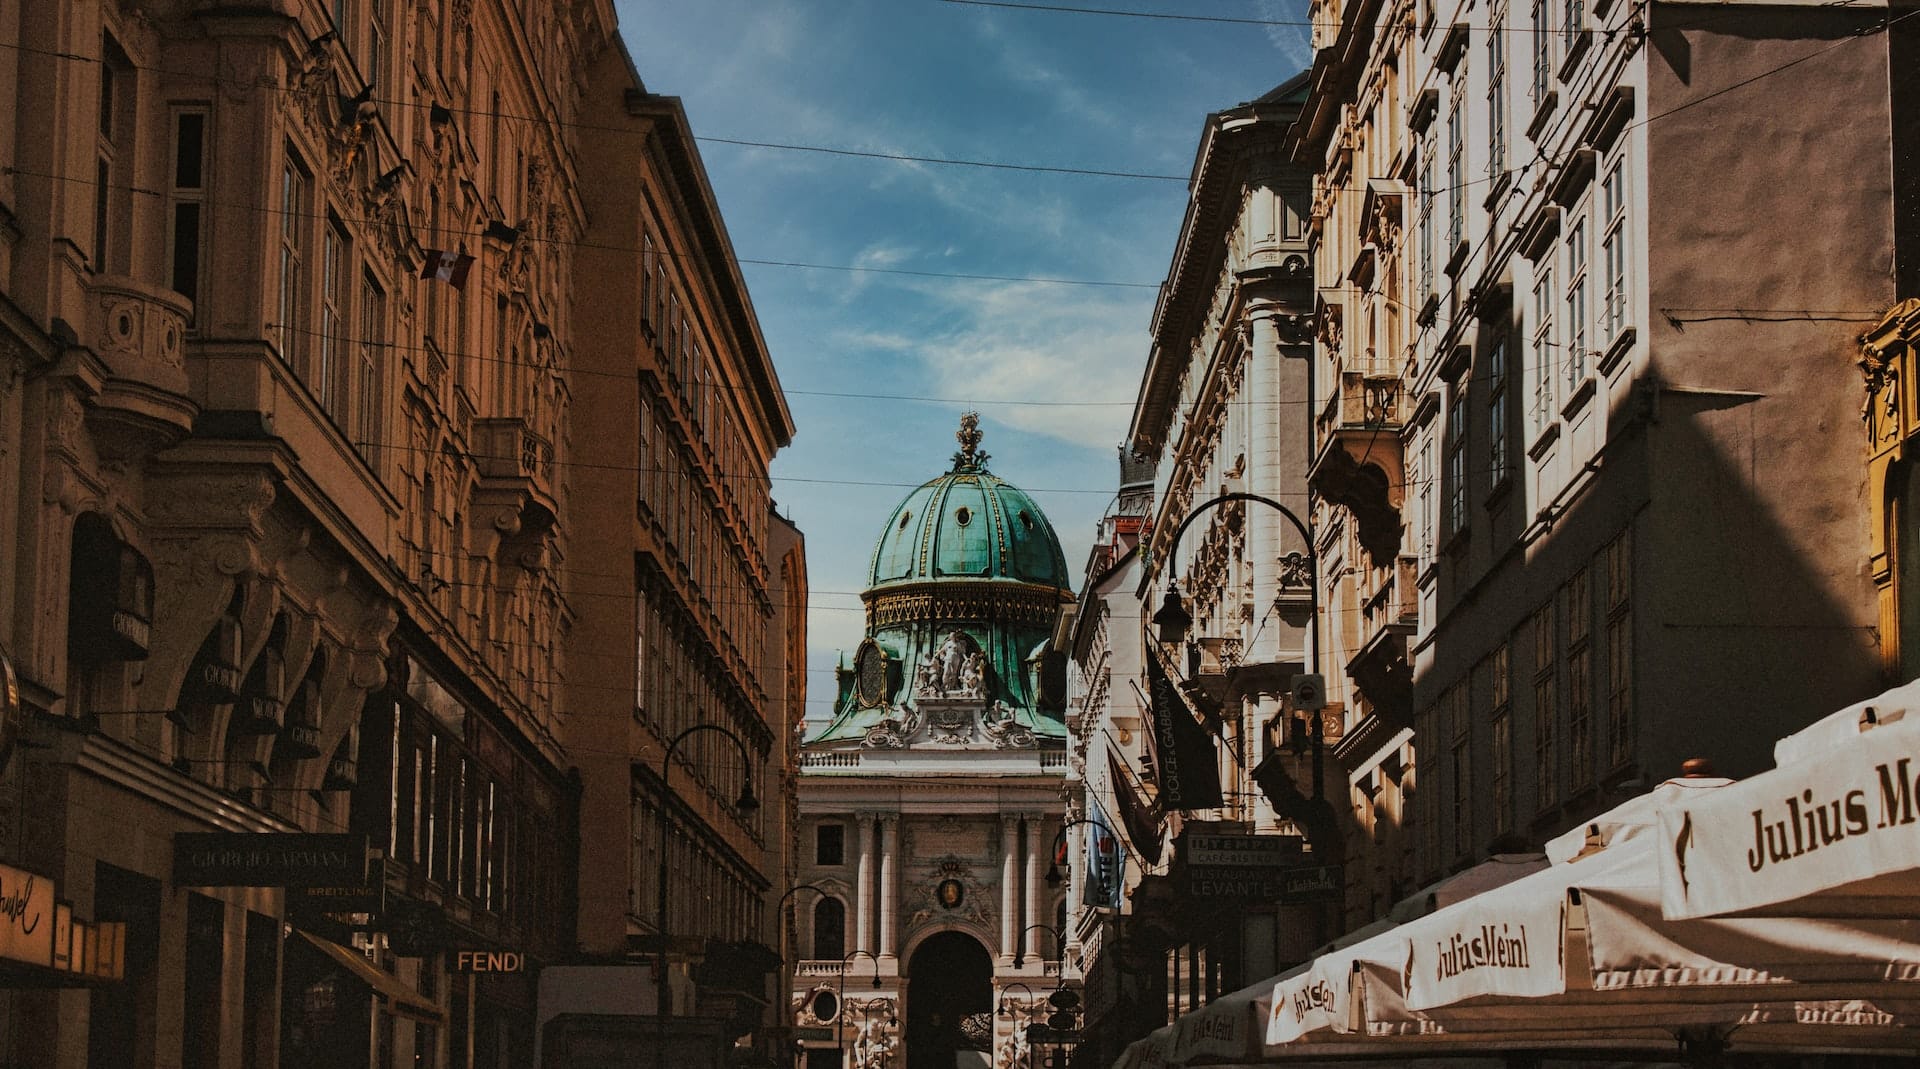 With the lovely Karlskirche as its main feature, Wieden is Vienna's 4th District and is packed with all kinds of accommodation options